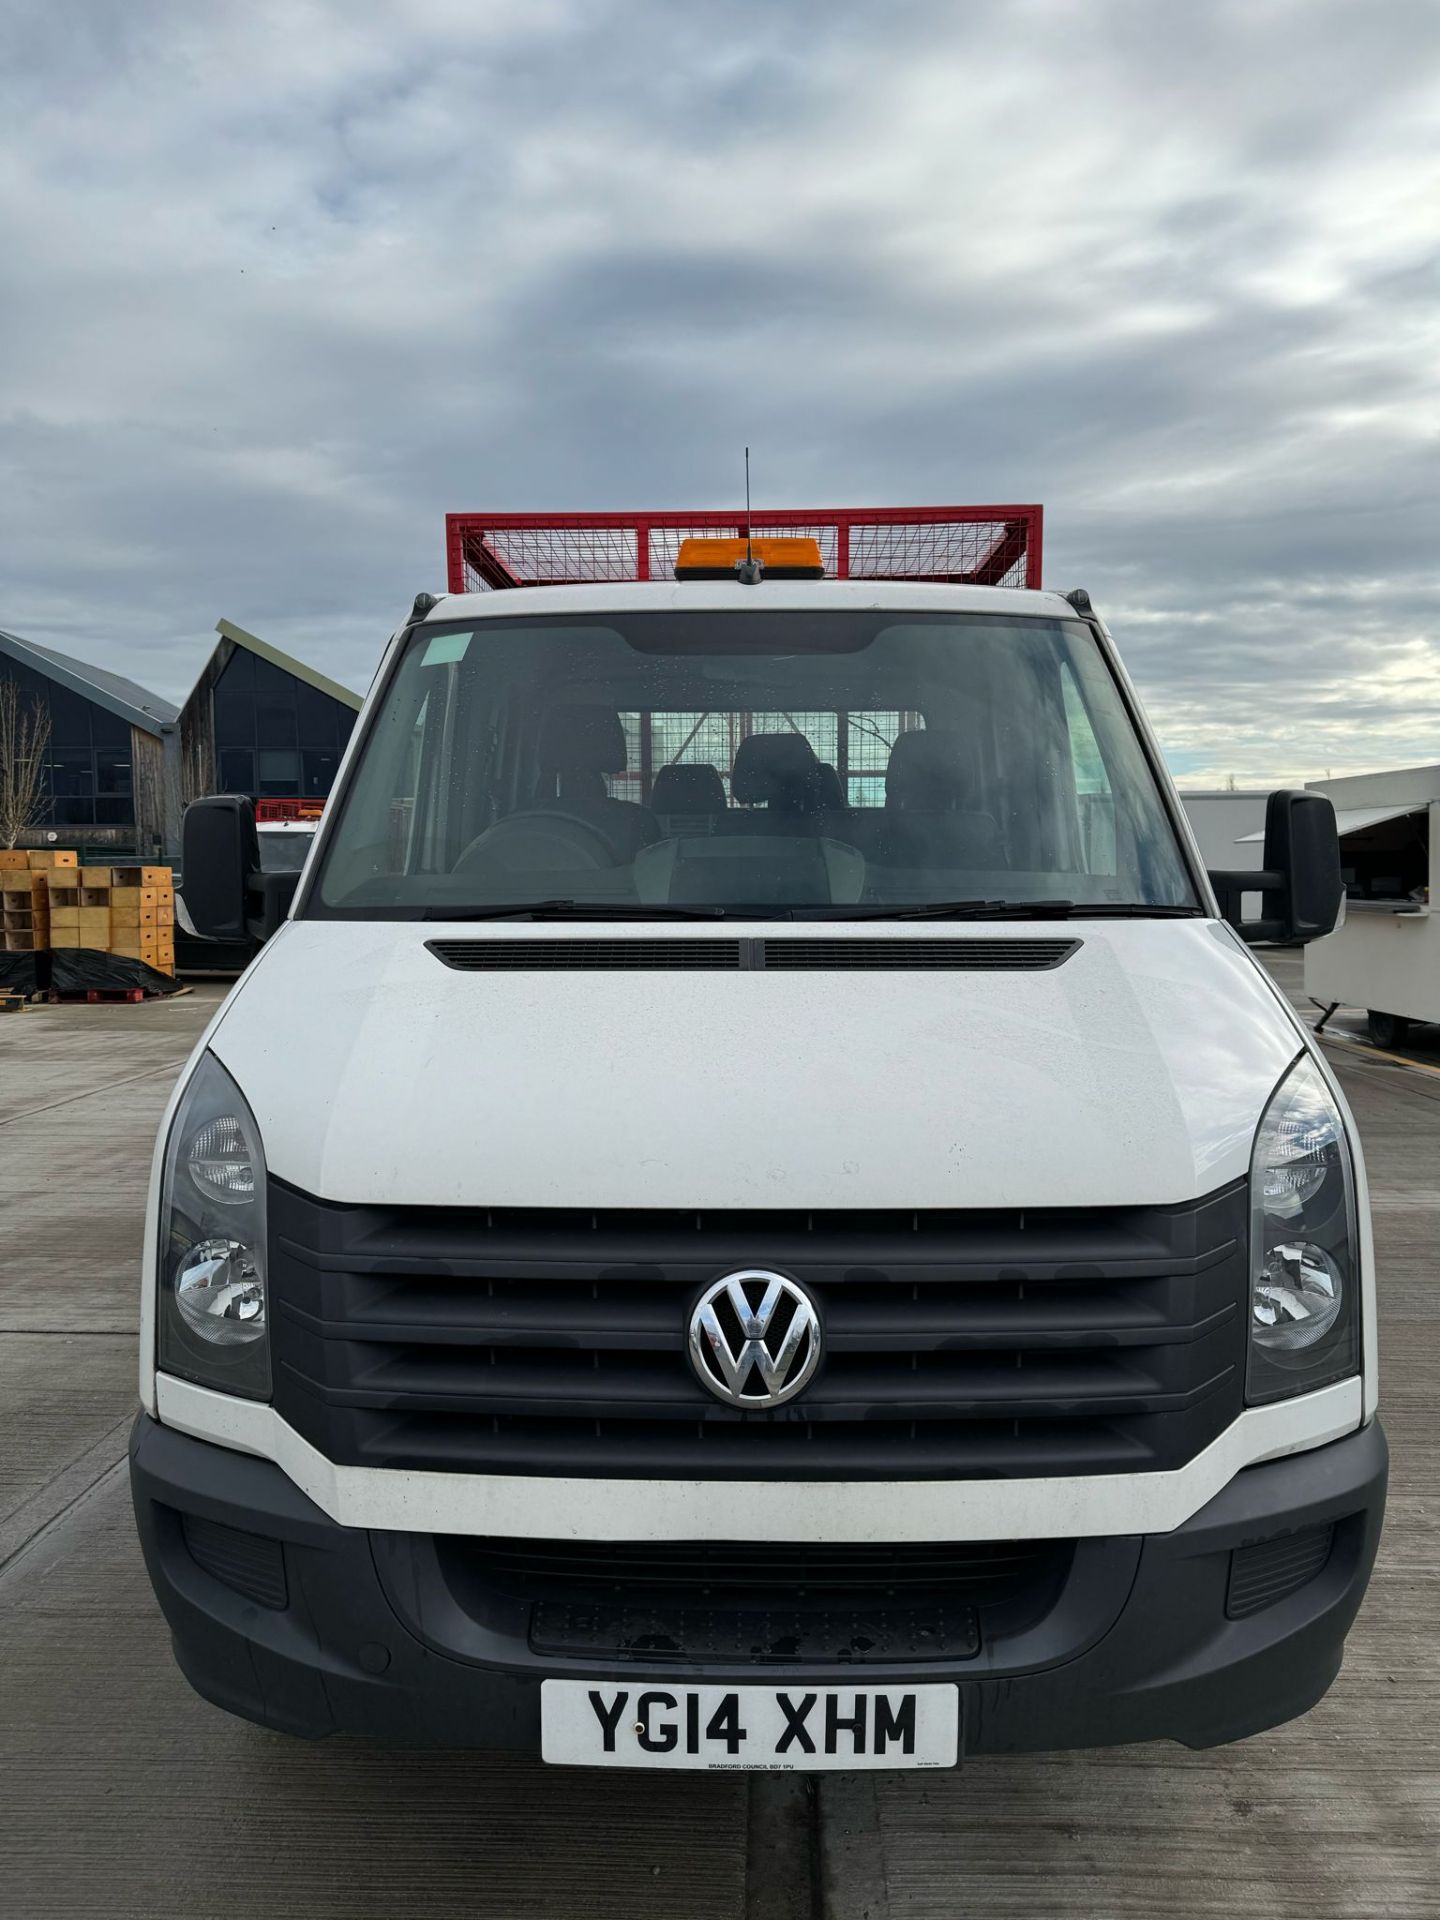 2013 - Volkswagen Crafter, Caged Tipper (Ex-Council Owned & Maintained) - Image 2 of 25